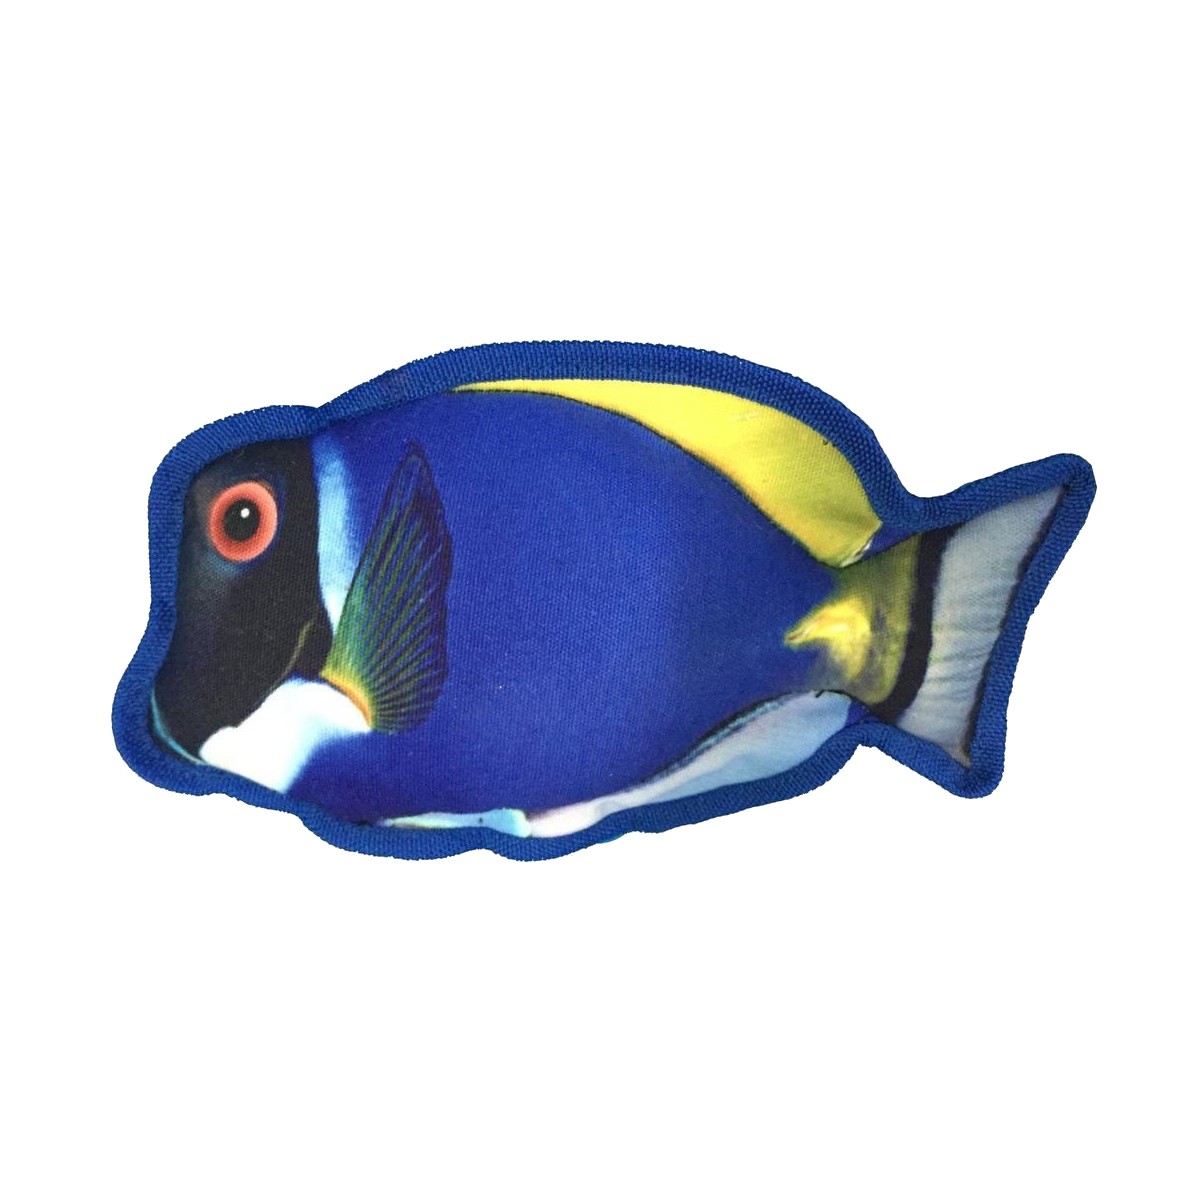 Dogline Tropical Fish Dog Toy - Blue Tang